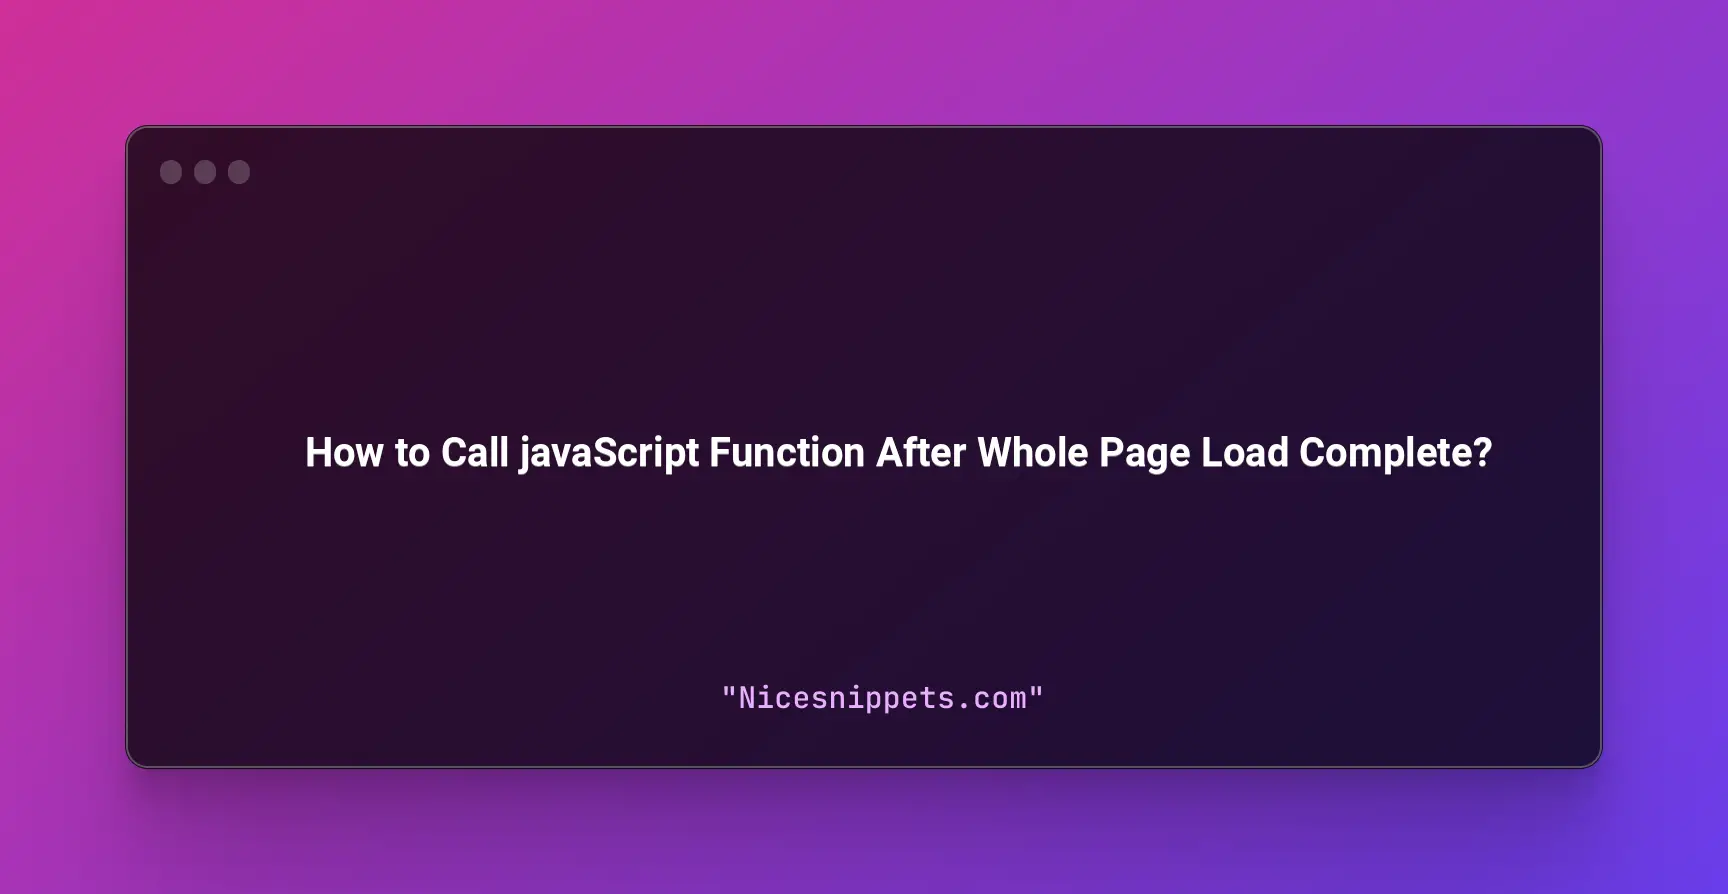 How to Call javaScript Function After Whole Page Load Complete?